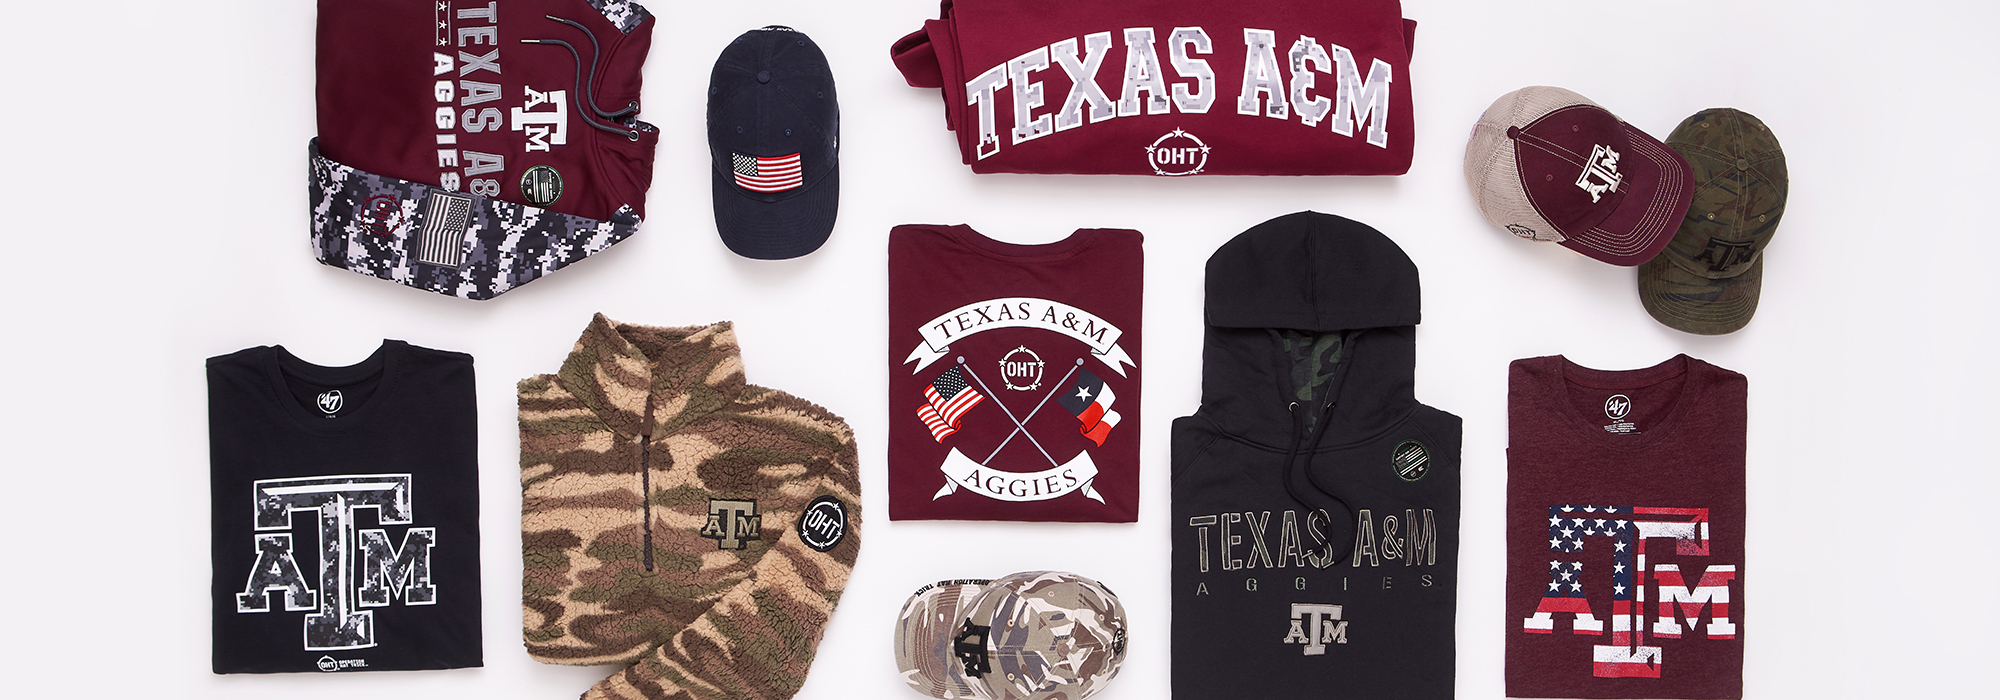 TAMU and Operation Hat Trick branded merchandise laid out on a white background. Some items include hats, sweatshirts, t-shirts, and blankets.